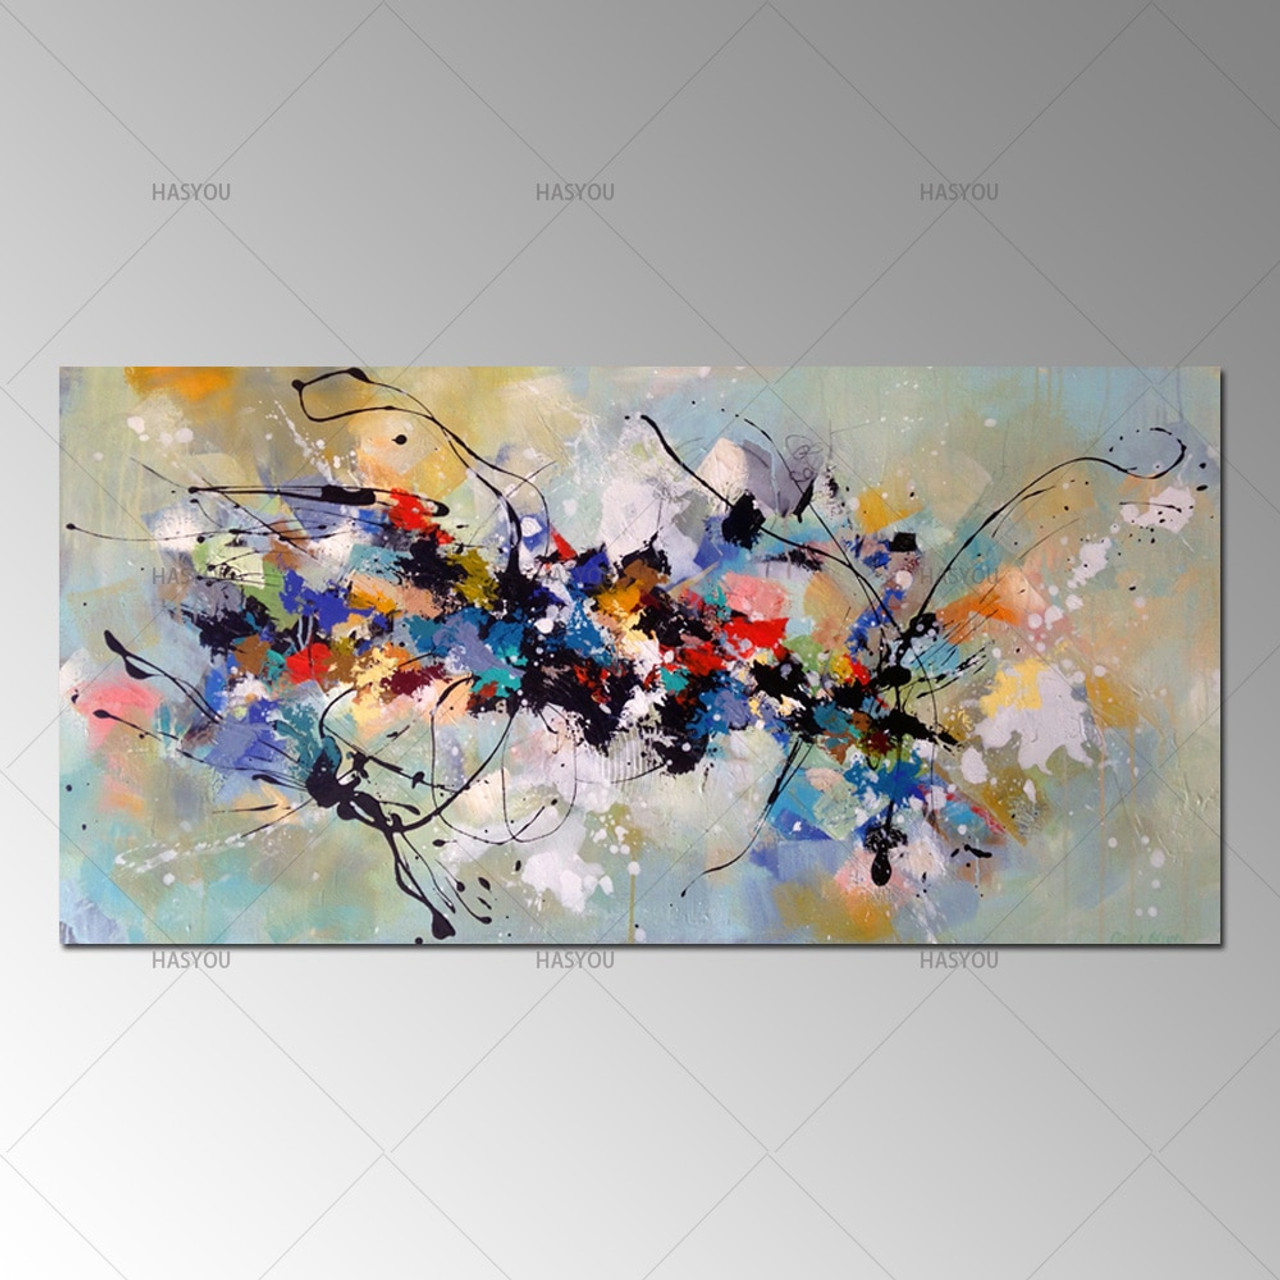 Best New Picture Painting Abstract Oil Paintings On Canvas 100 Handmade Colorful Canvas Art Modern Art For Home Wall Decor Onshopdeals Com